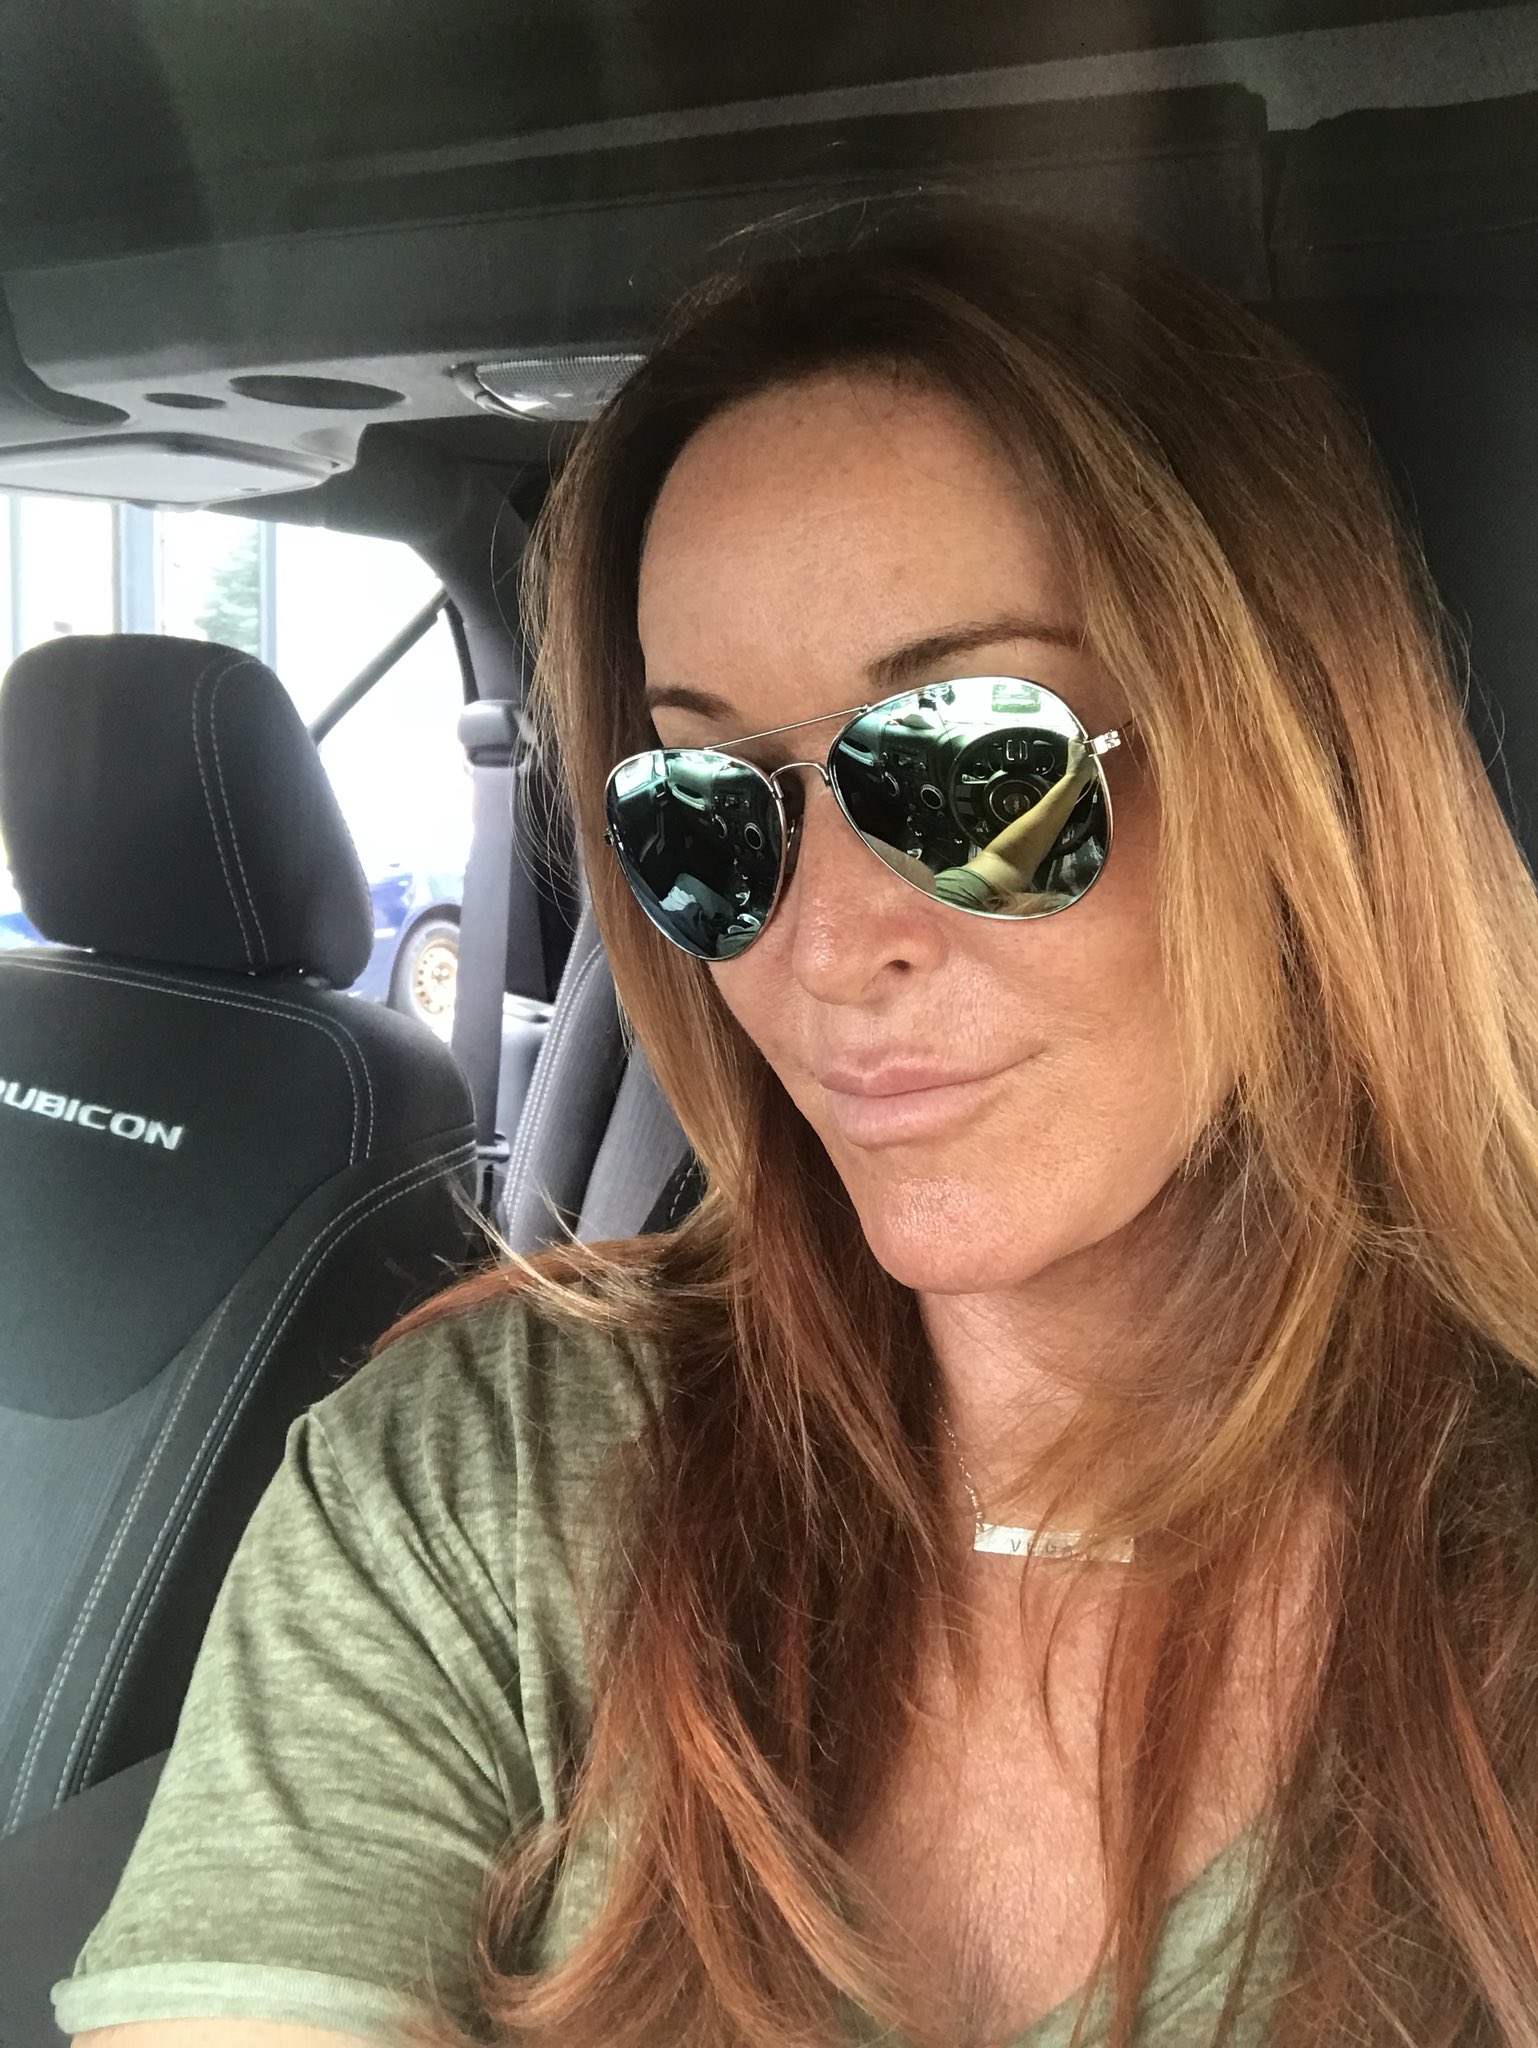 Rachel Steele On Twitter I Took This W While Texting With The Sexy Marcuslondon Milf 